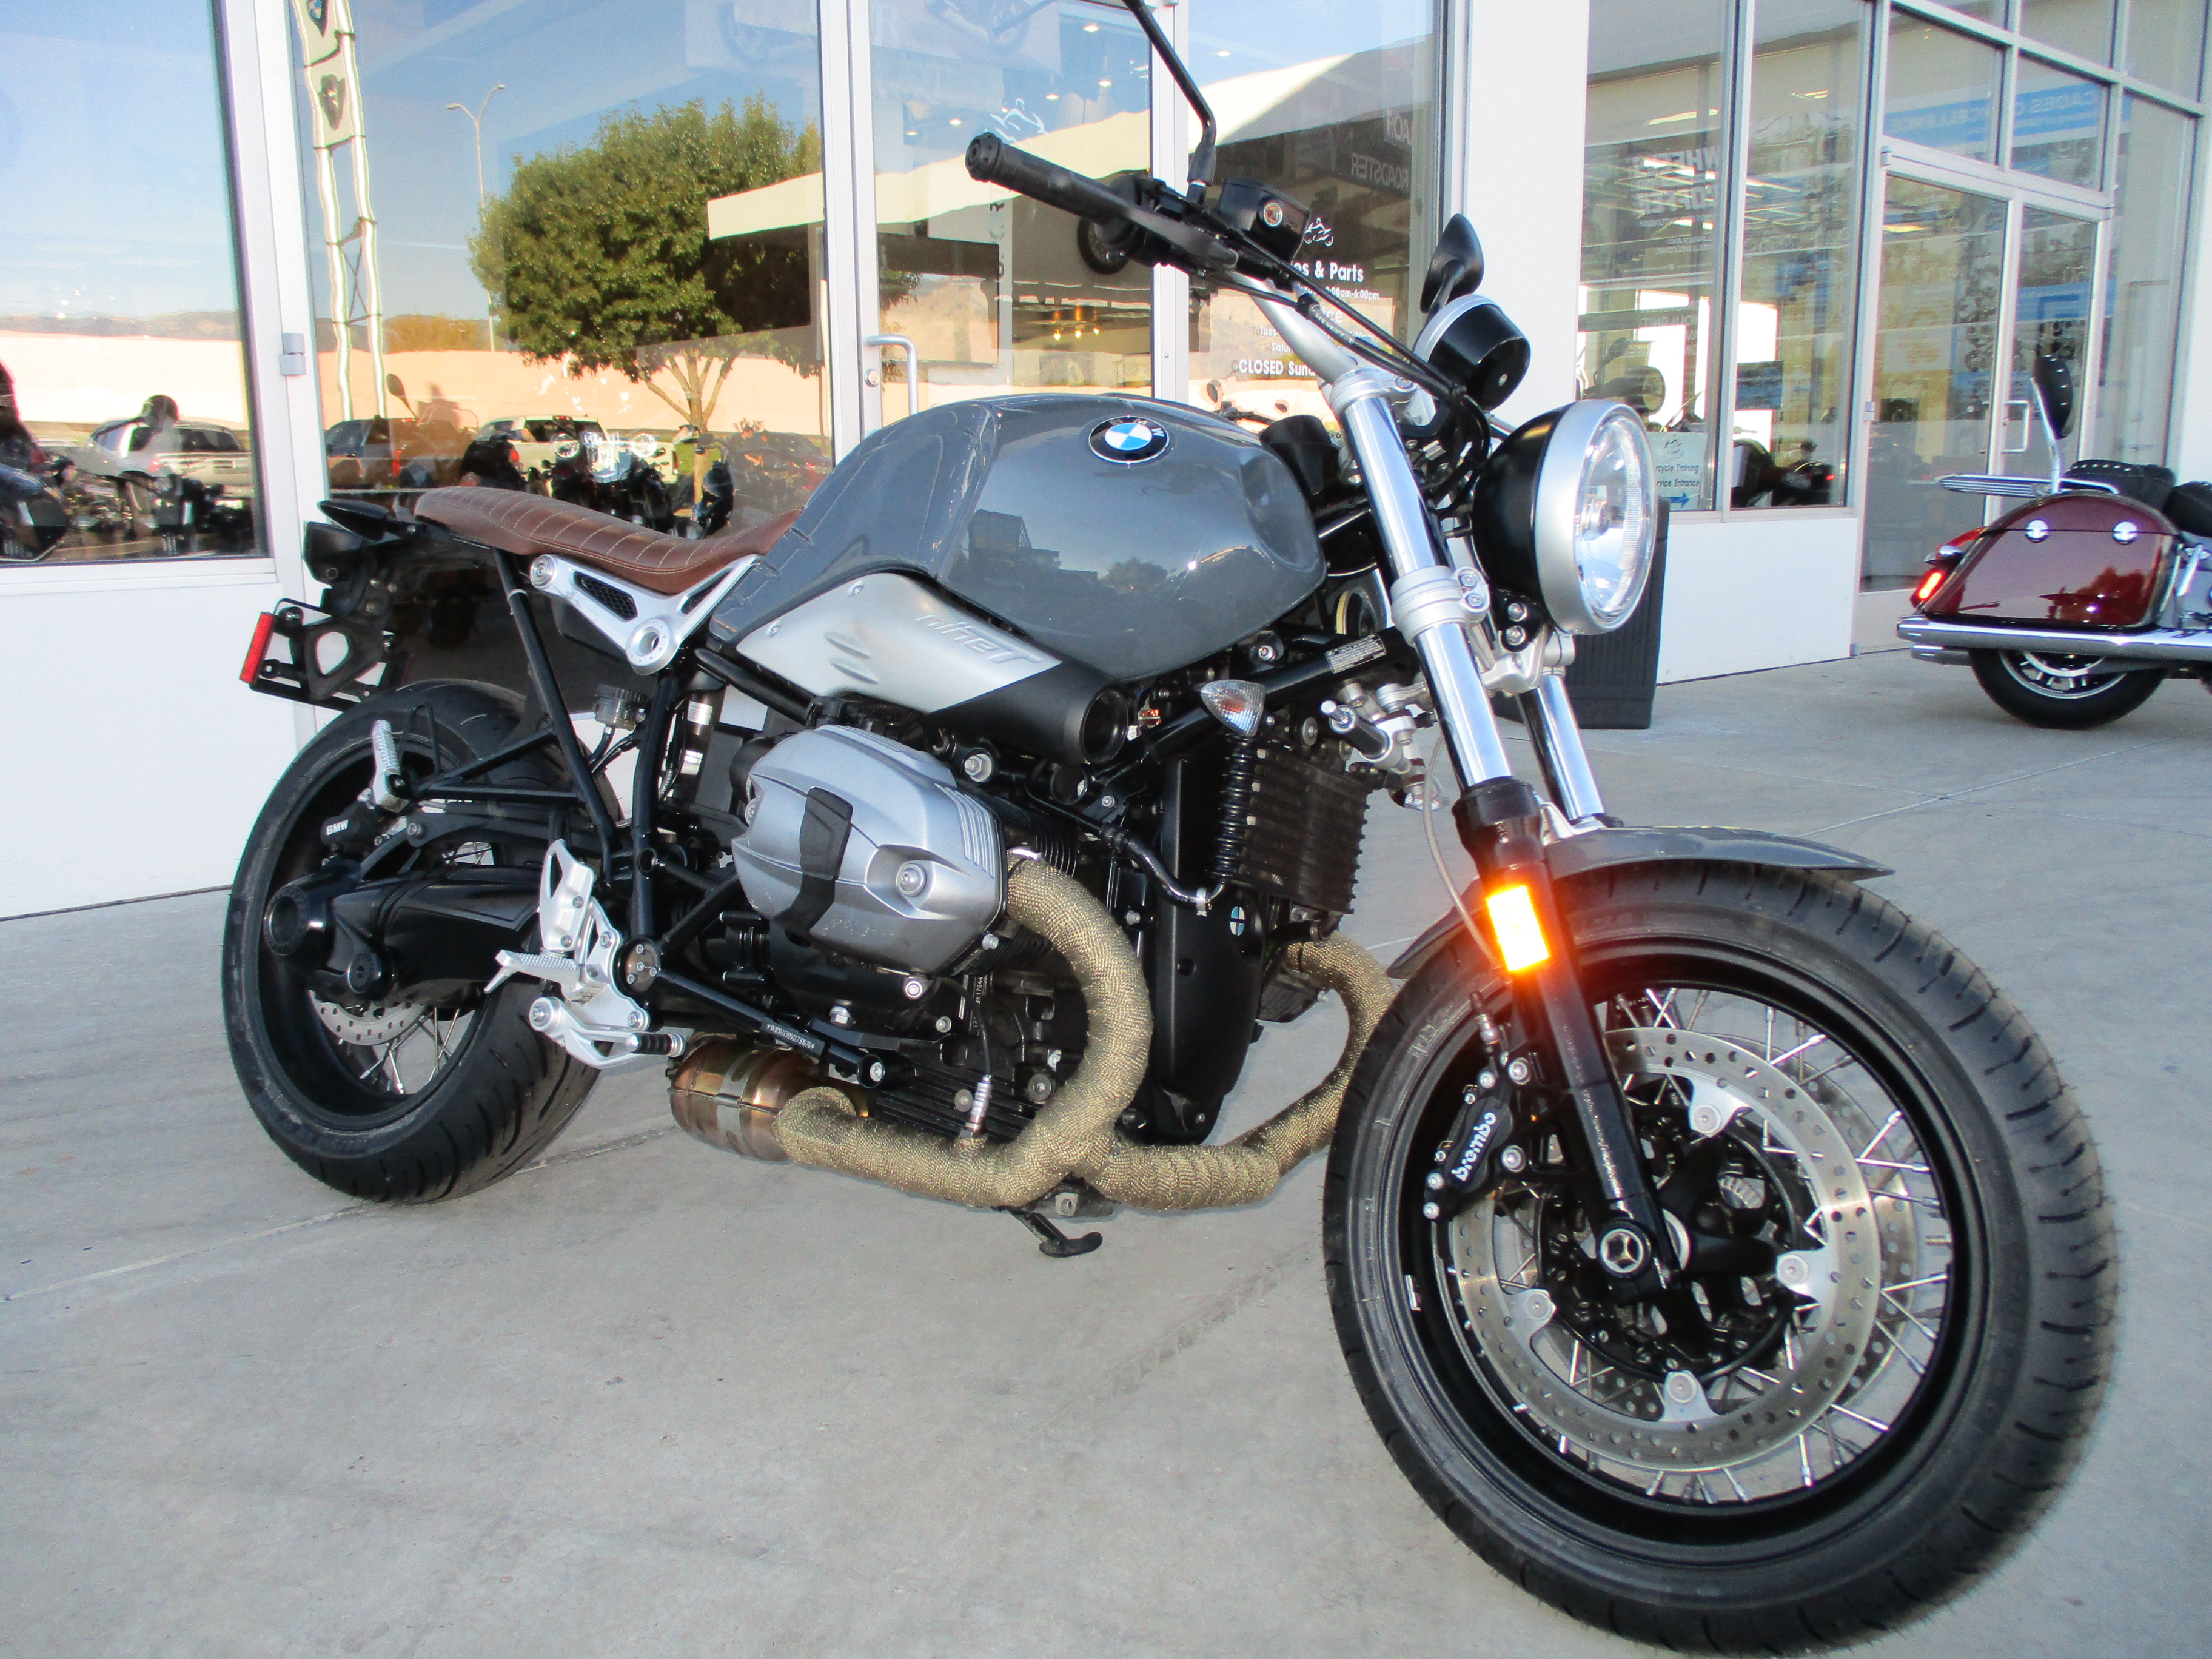 Pre-Owned Motorcycle Inventory - R NINE T PURE - Santa Fe BMW